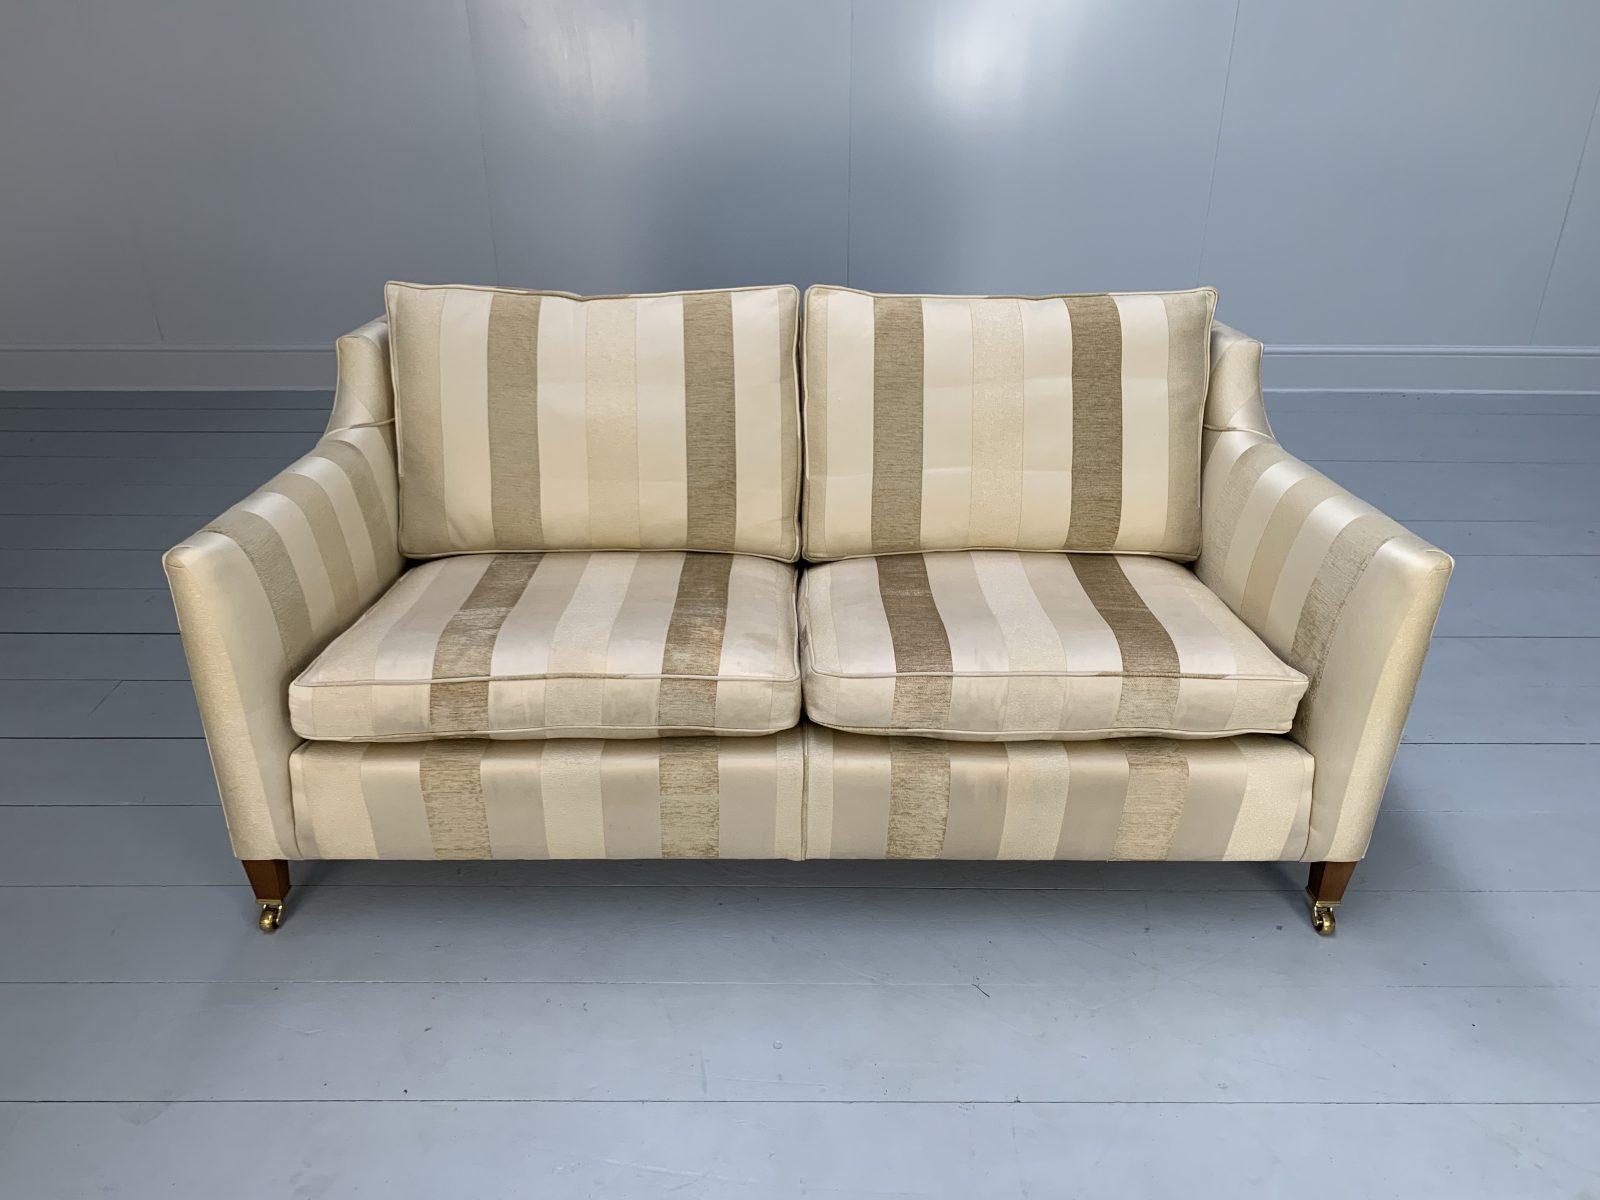 Hello Friends, and welcome to another unmissable offering from Lord Browns Furniture, the UK’s premier resource for fine Sofas and Chairs.

On offer on this occasion is a superb, majestic Duresta “Villeneuve” Large 2.5-Seat Sofa, dressed in their